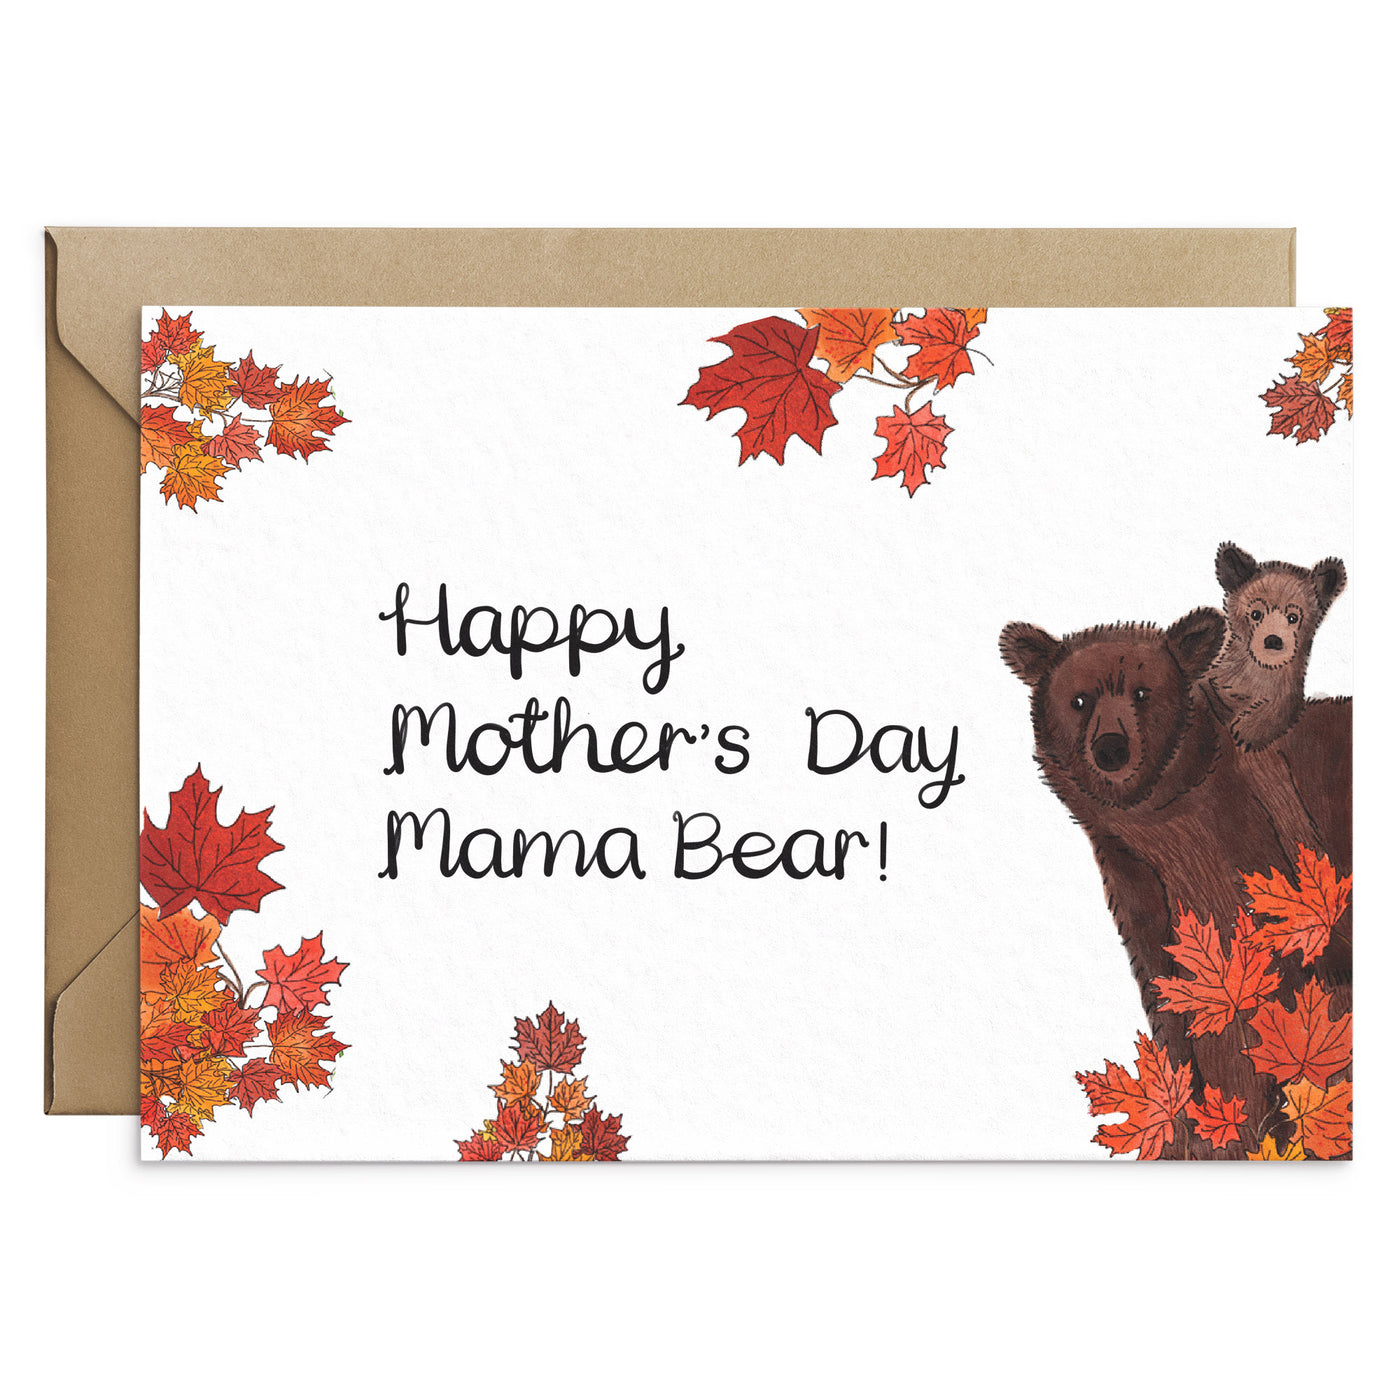 Happy Mother's Day Mama Bear Card - Poppins & Co.